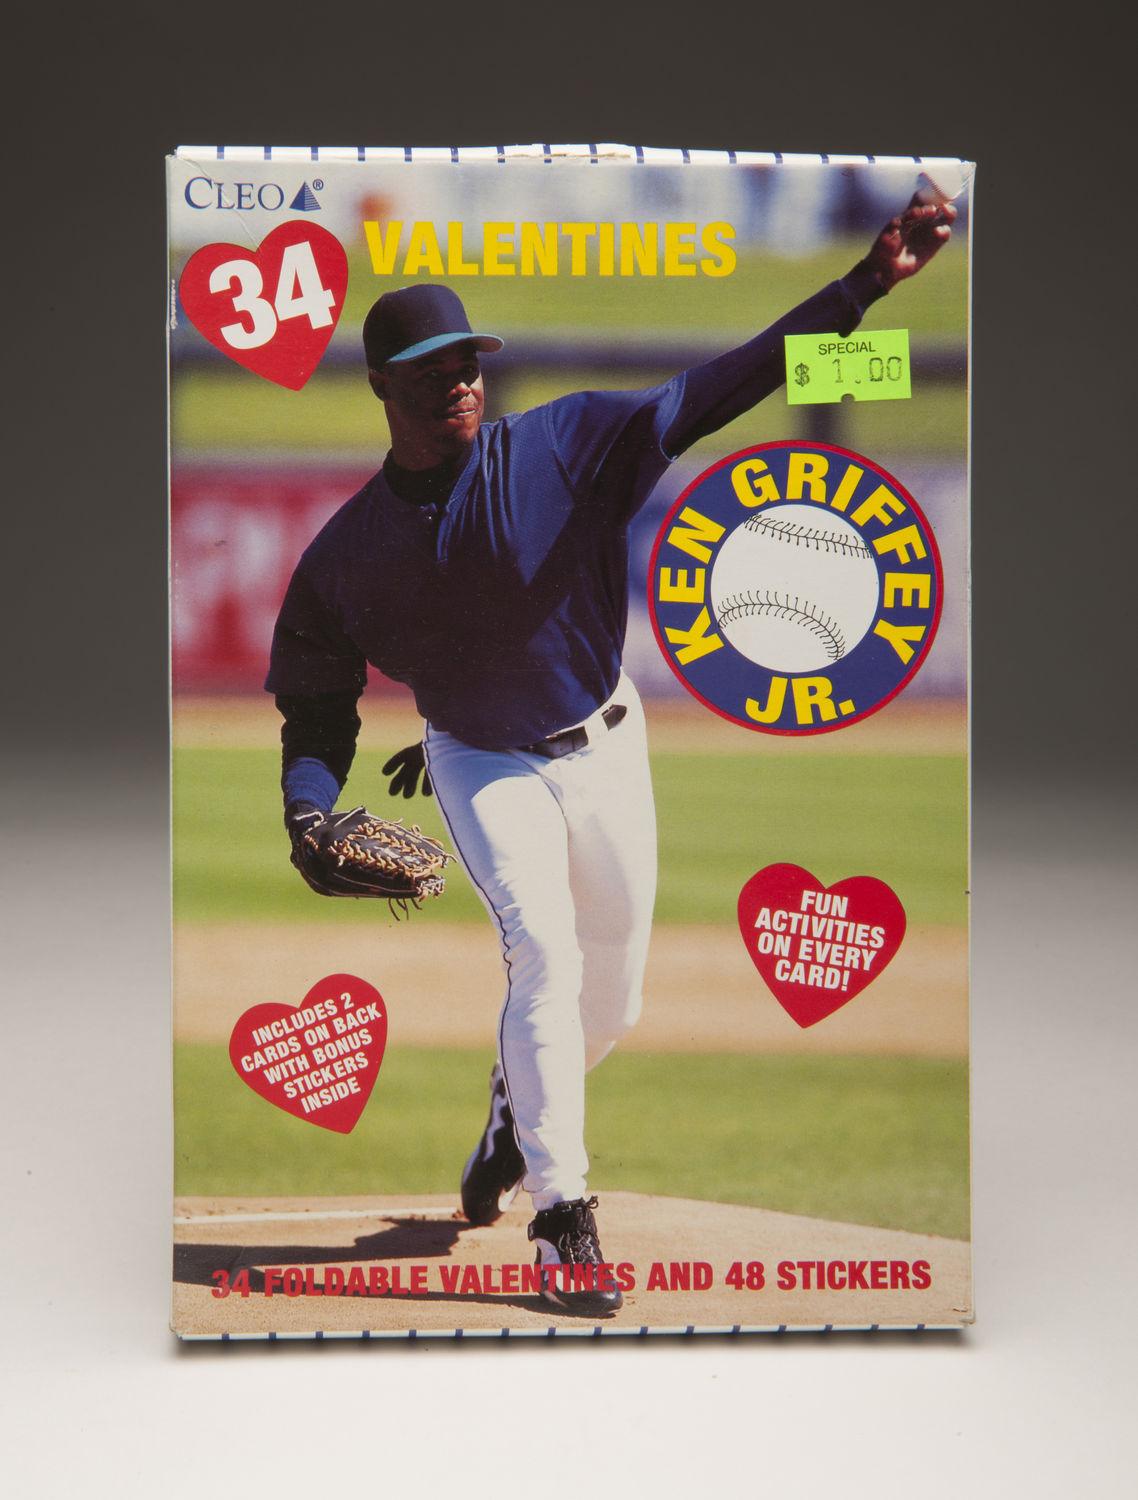 Ken Griffey Jr.'s first White Sox cards coming next month